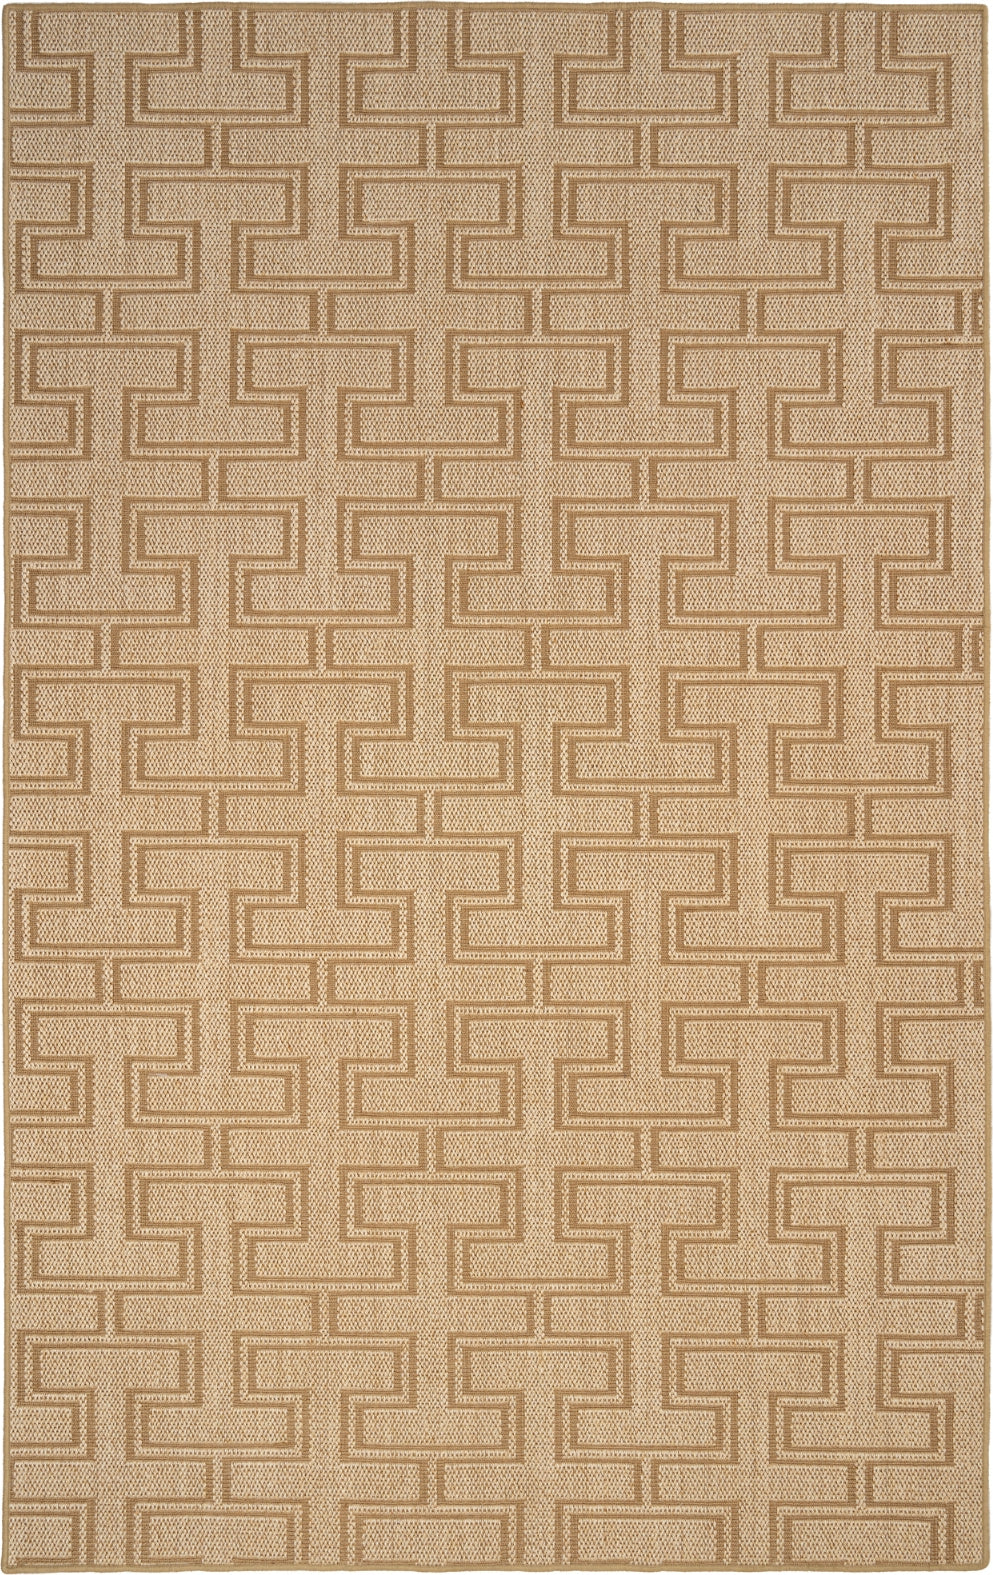 Capel Chanel 2211 Sand 650 Area Rug